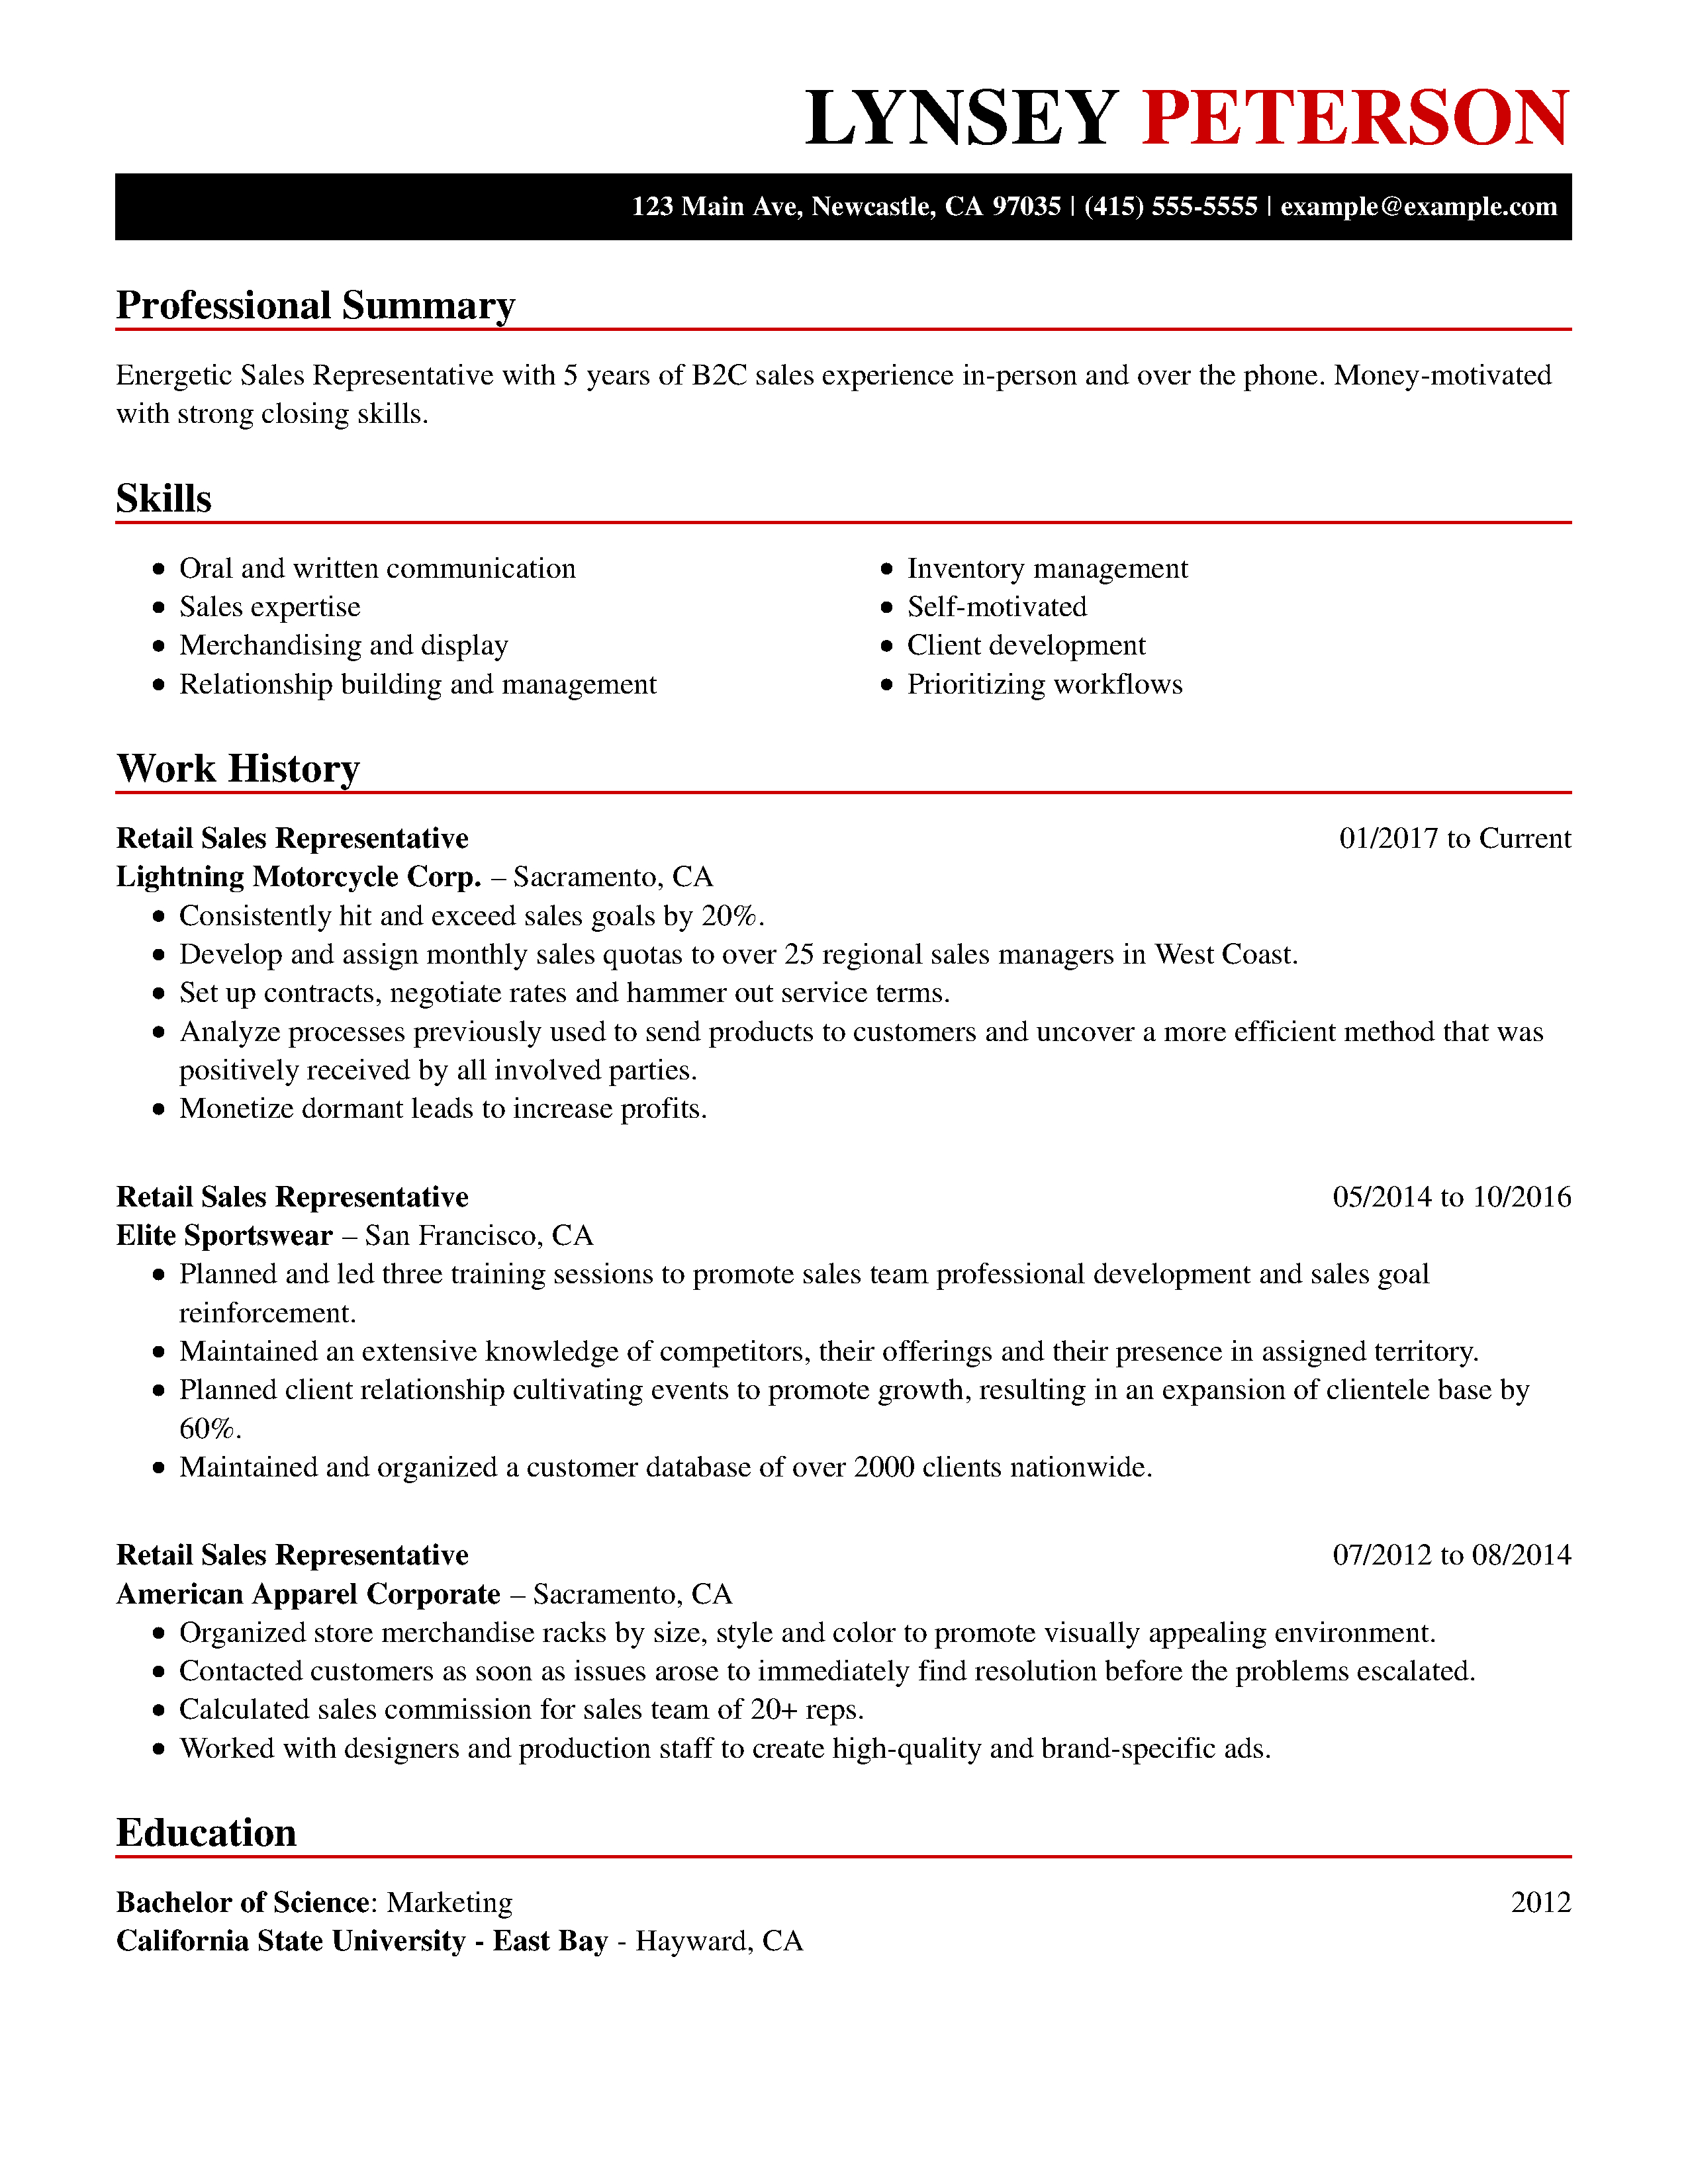 Customer Service Resume Examples 30 Resume Examples View Industry Job Title